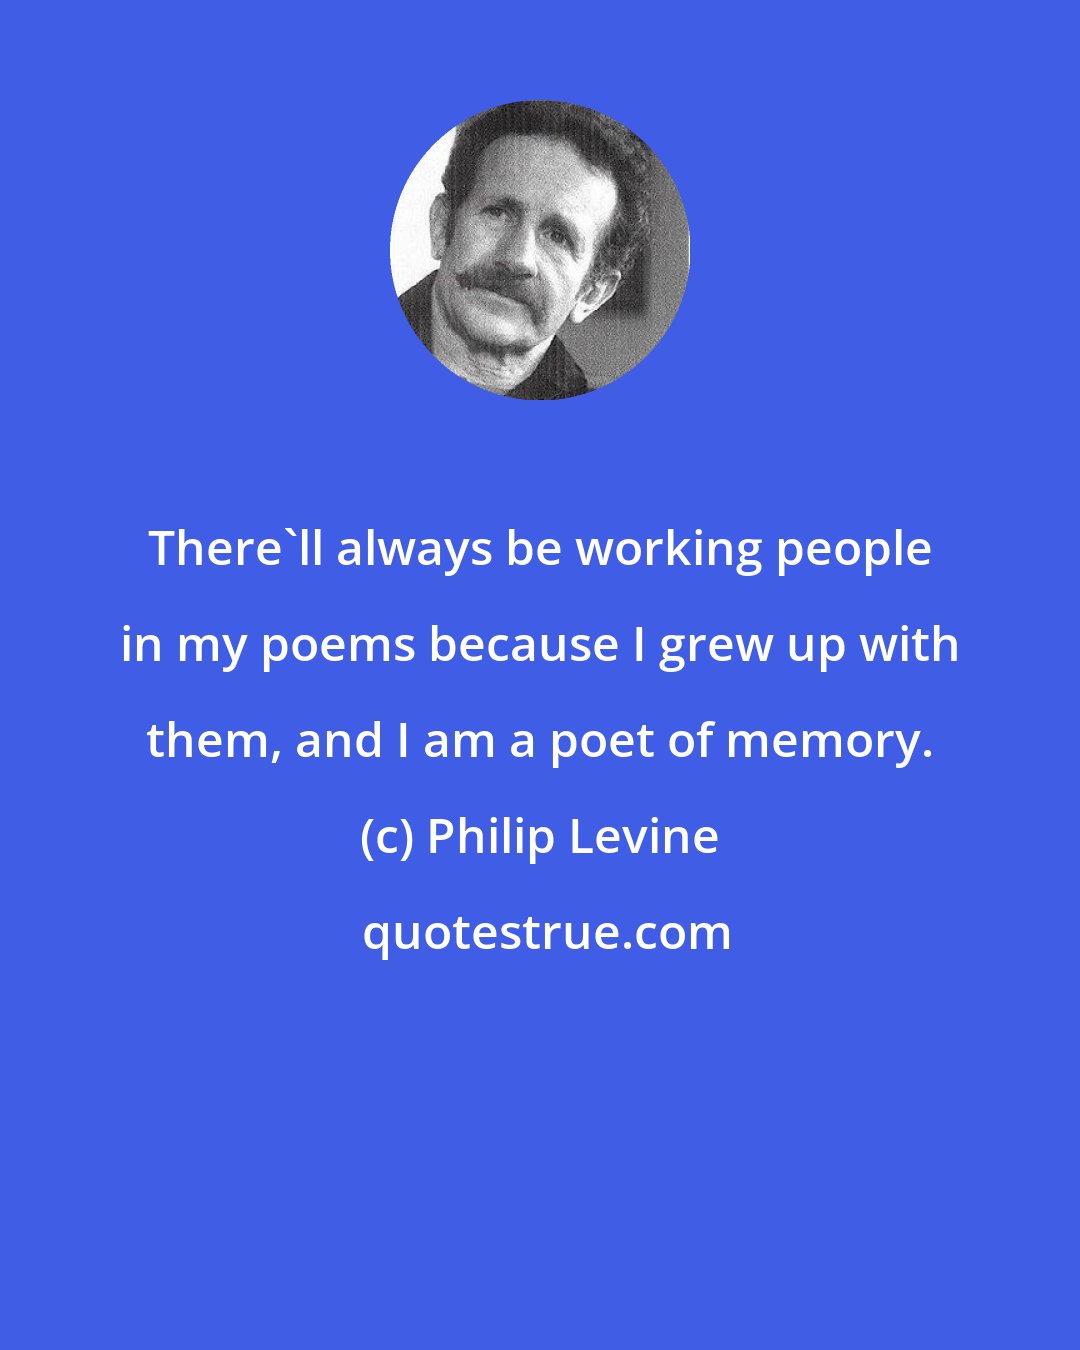 Philip Levine: There'll always be working people in my poems because I grew up with them, and I am a poet of memory.